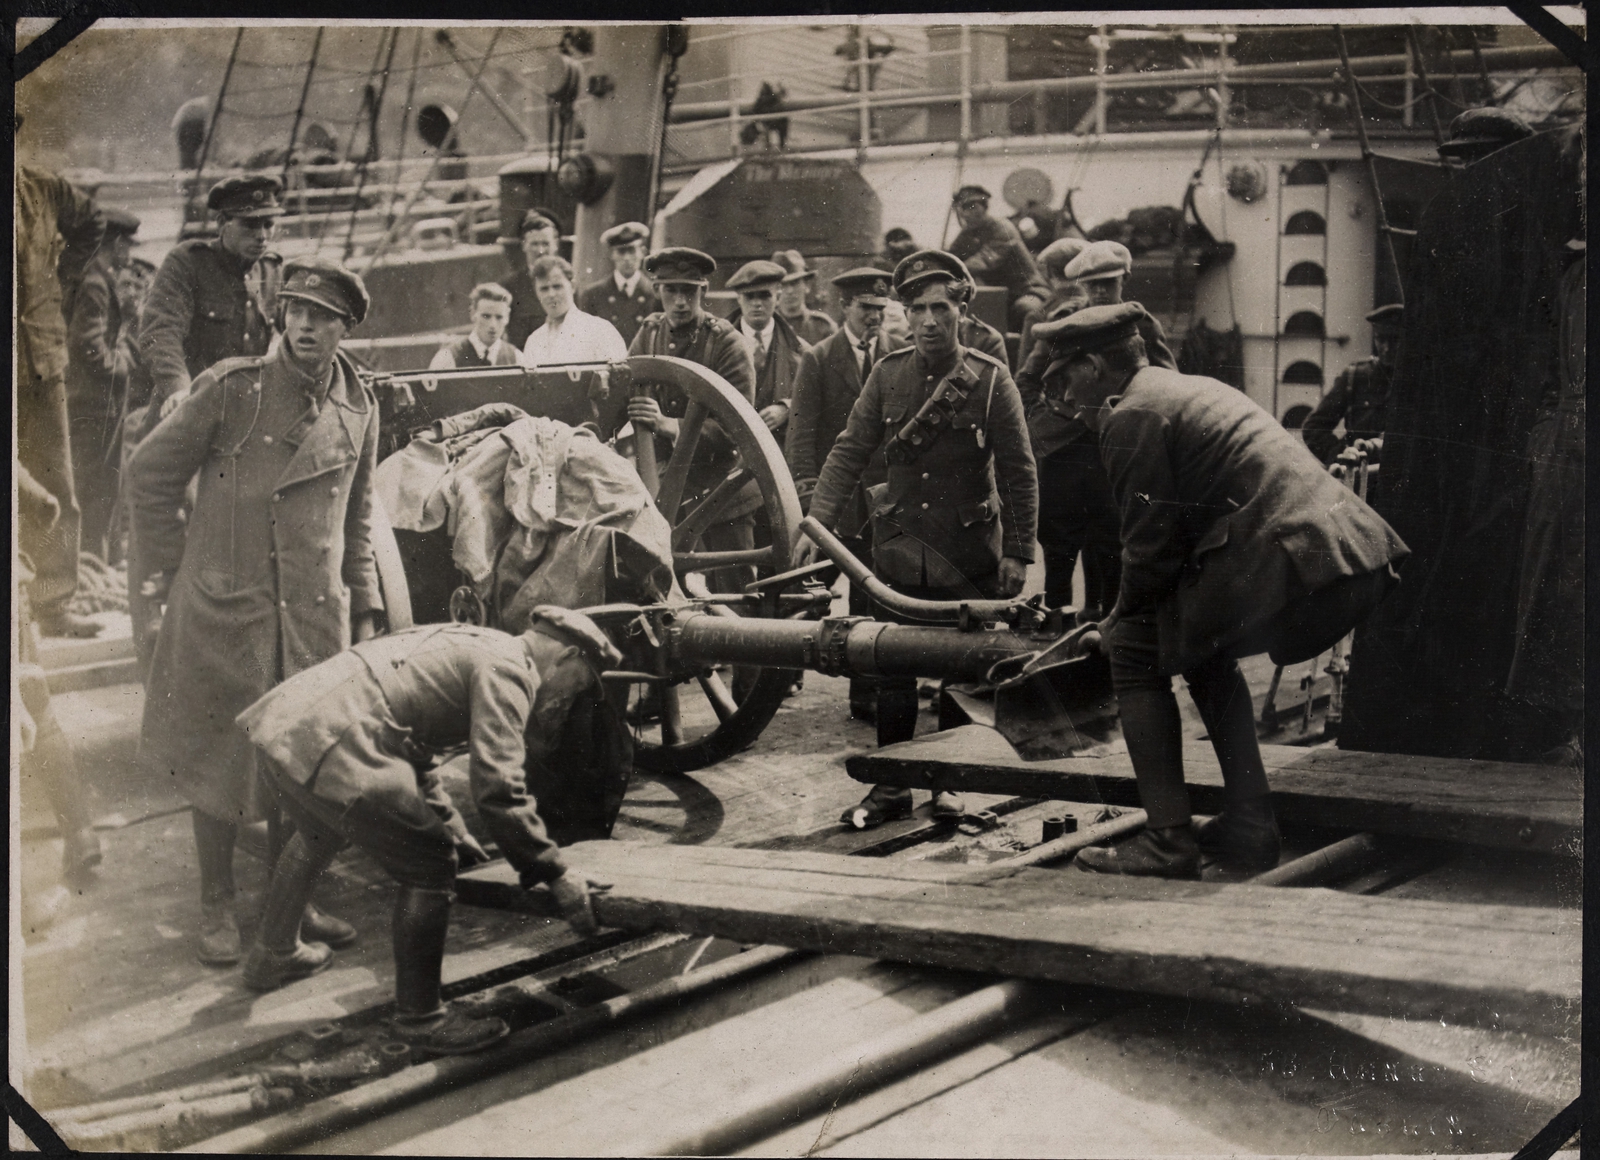 Image - National Army troops removing a heavy gun from the boat at Passage West. Cork. Image courtesy of the National Library of Ireland